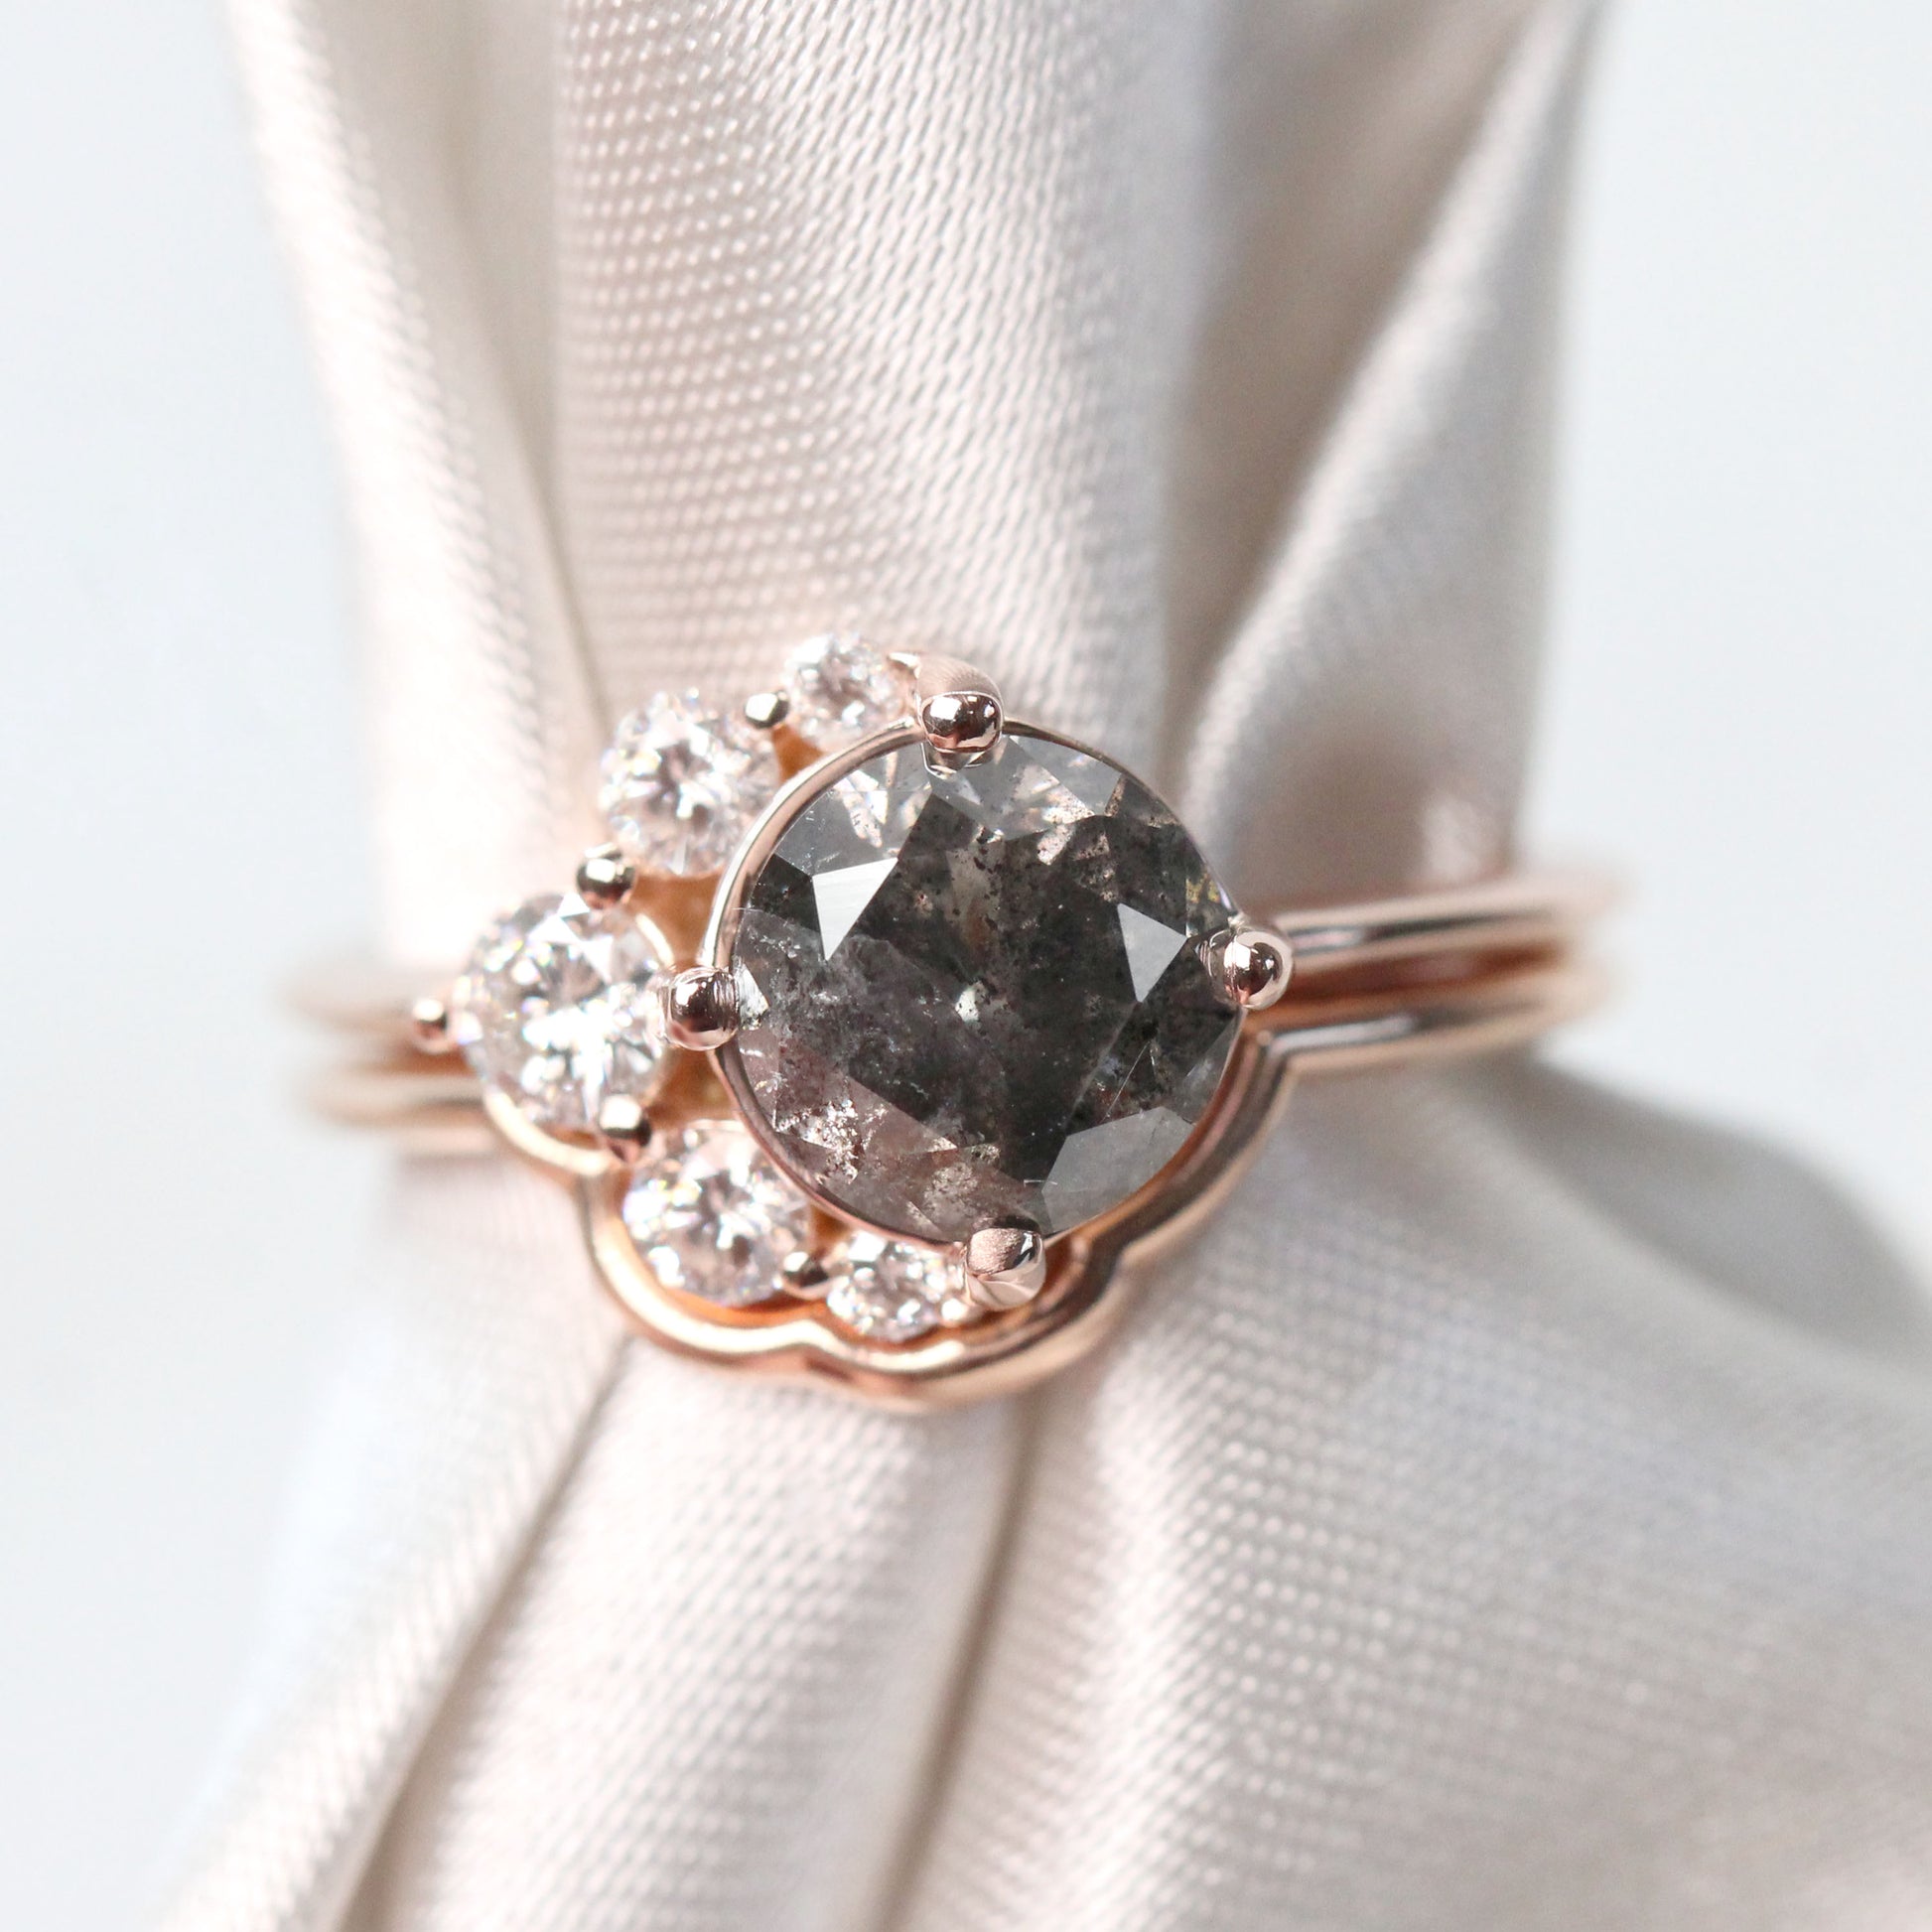 Carell Ring + Band with a 1.98 Carat Black Round Celestial Diamond and White Accent Diamonds in 14k Rose Gold - Ready to Size and Ship - Midwinter Co. Alternative Bridal Rings and Modern Fine Jewelry